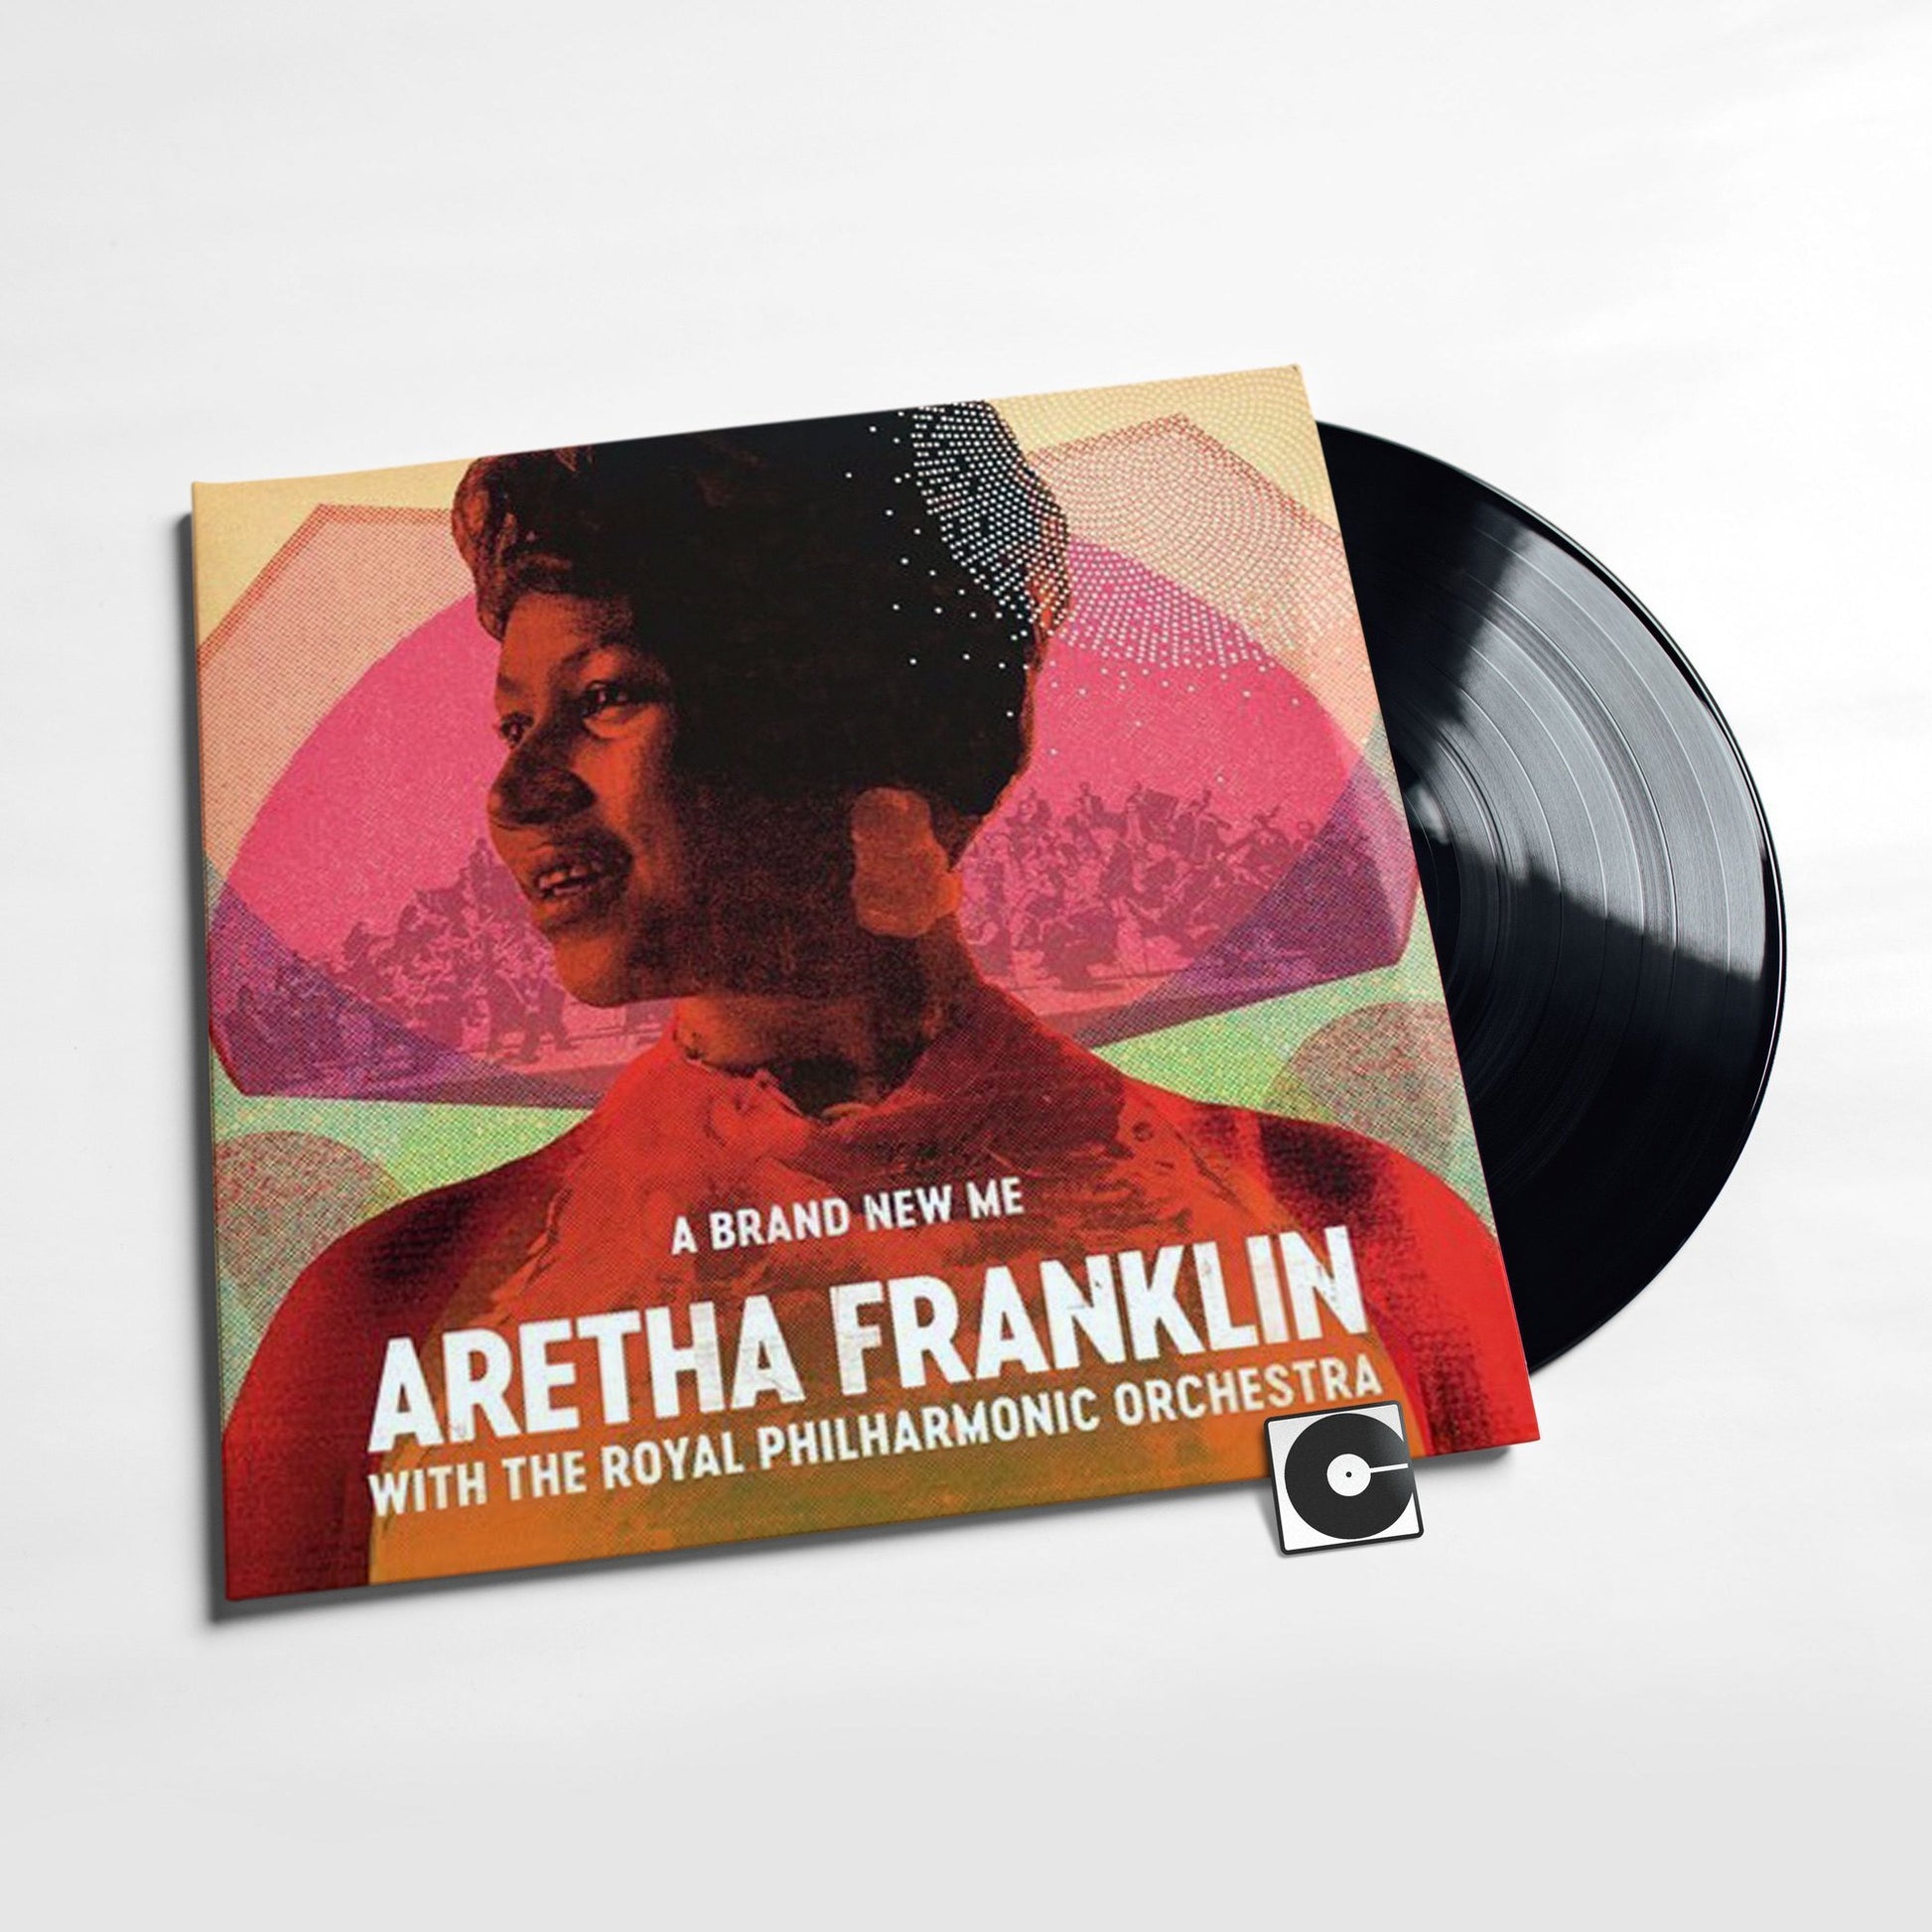 Respect' by Aretha Franklin with the Royal Philharmonic Orchestra